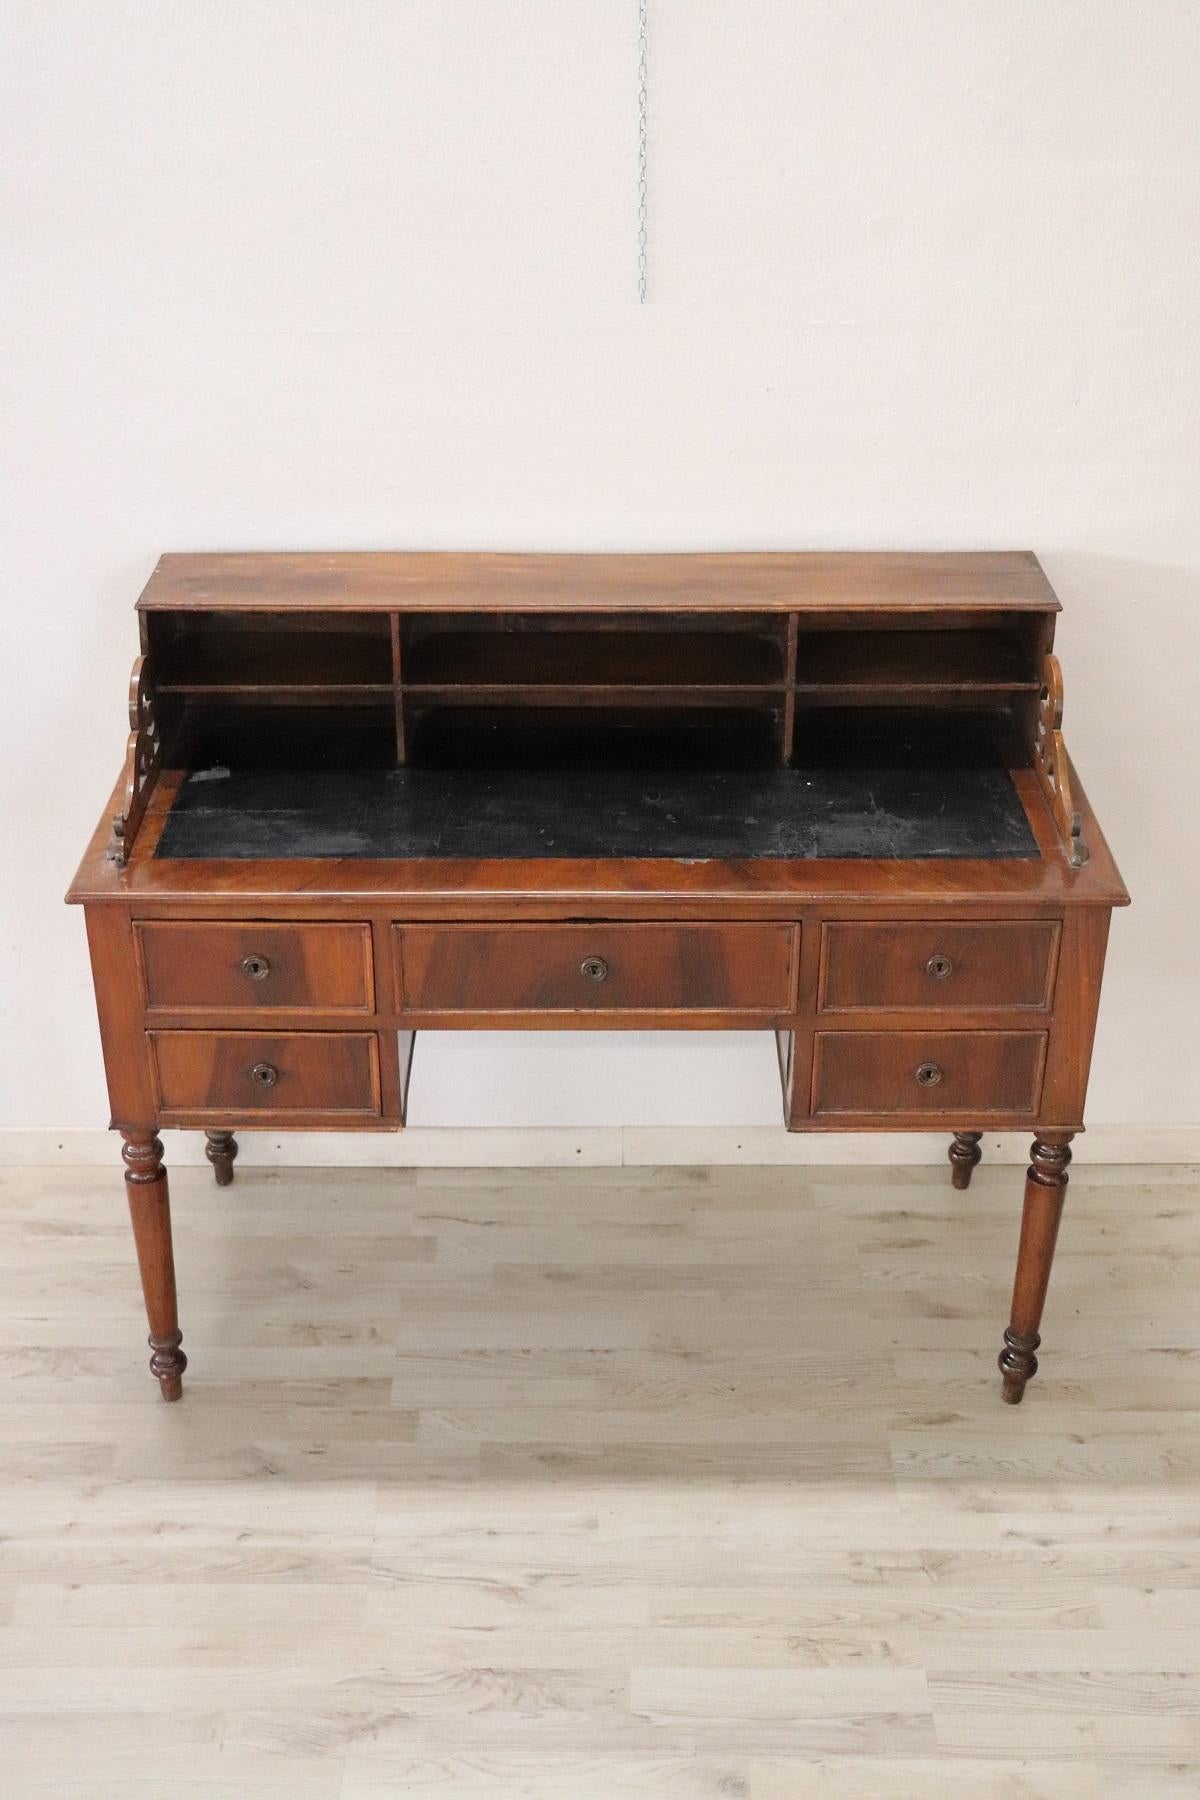 Elegant and essential antique Italian writing desk. Louis Philippe period with Classic shapely legs. Has a long drawer on the front and four small drawers. Above the plane many compartments for your letters or books. Rare and precious veneered